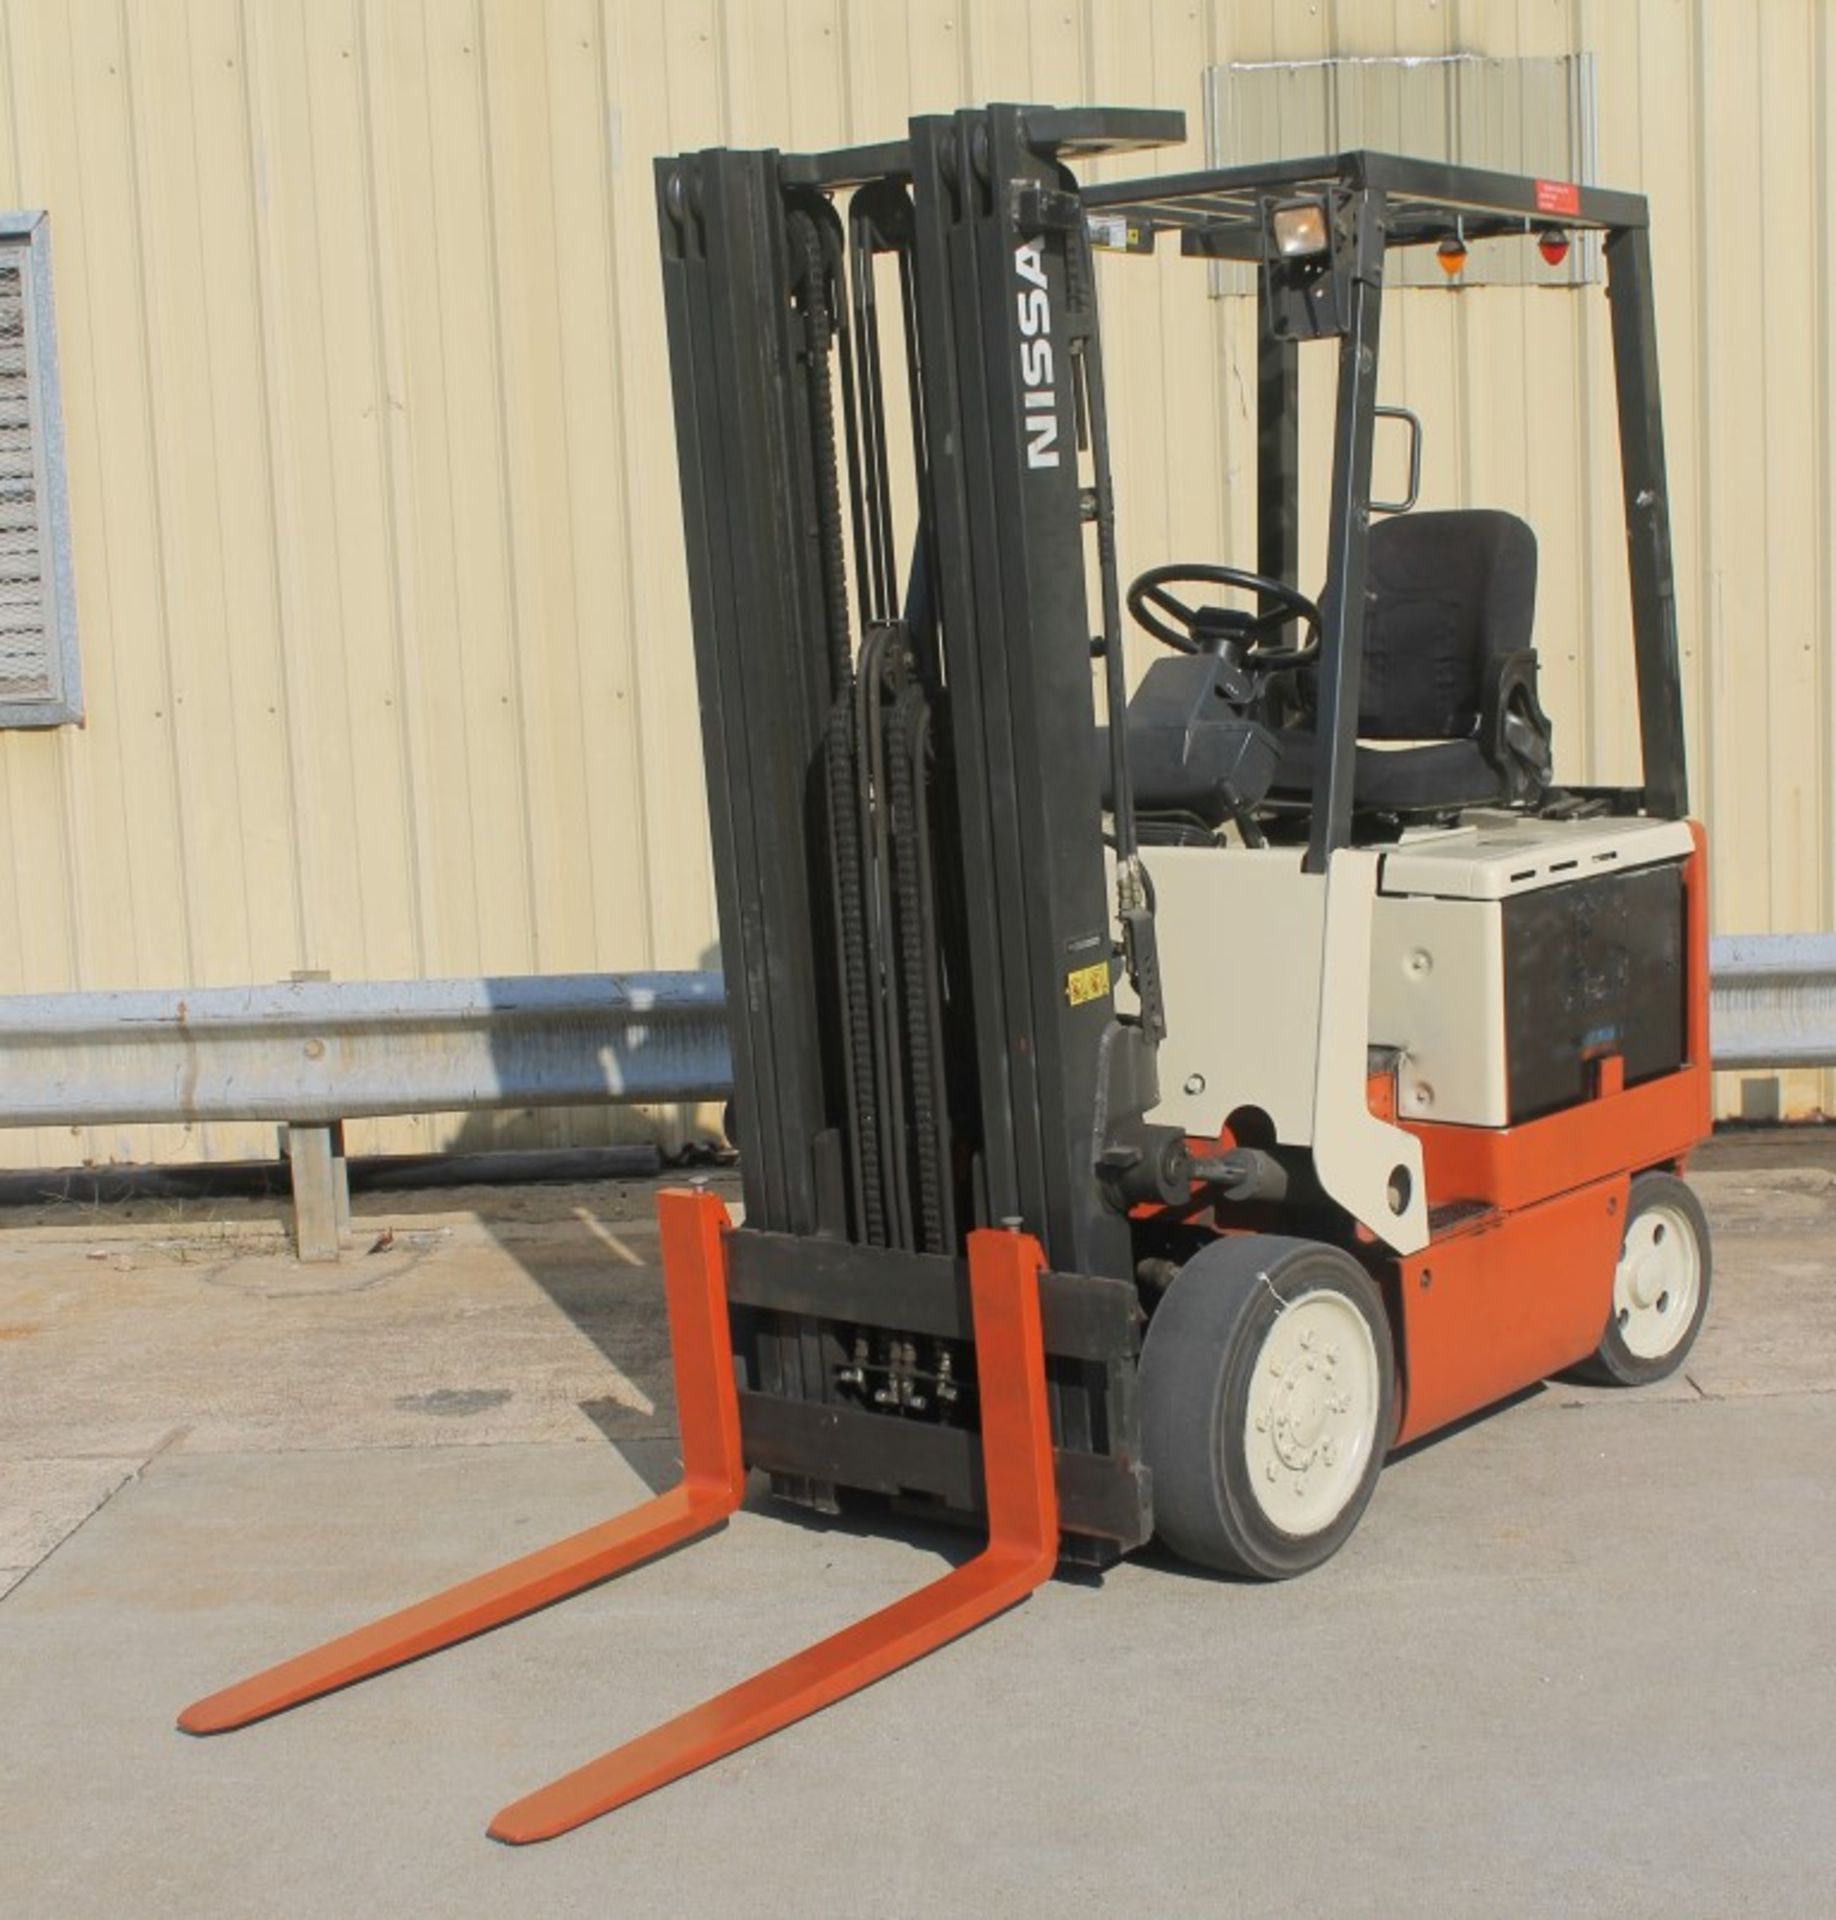 2004 NISSAN 4000 LBS CAPACITY ELECTRIC FORKLIFT WITH 2011 BATTERY, (WATCH VIDEO)